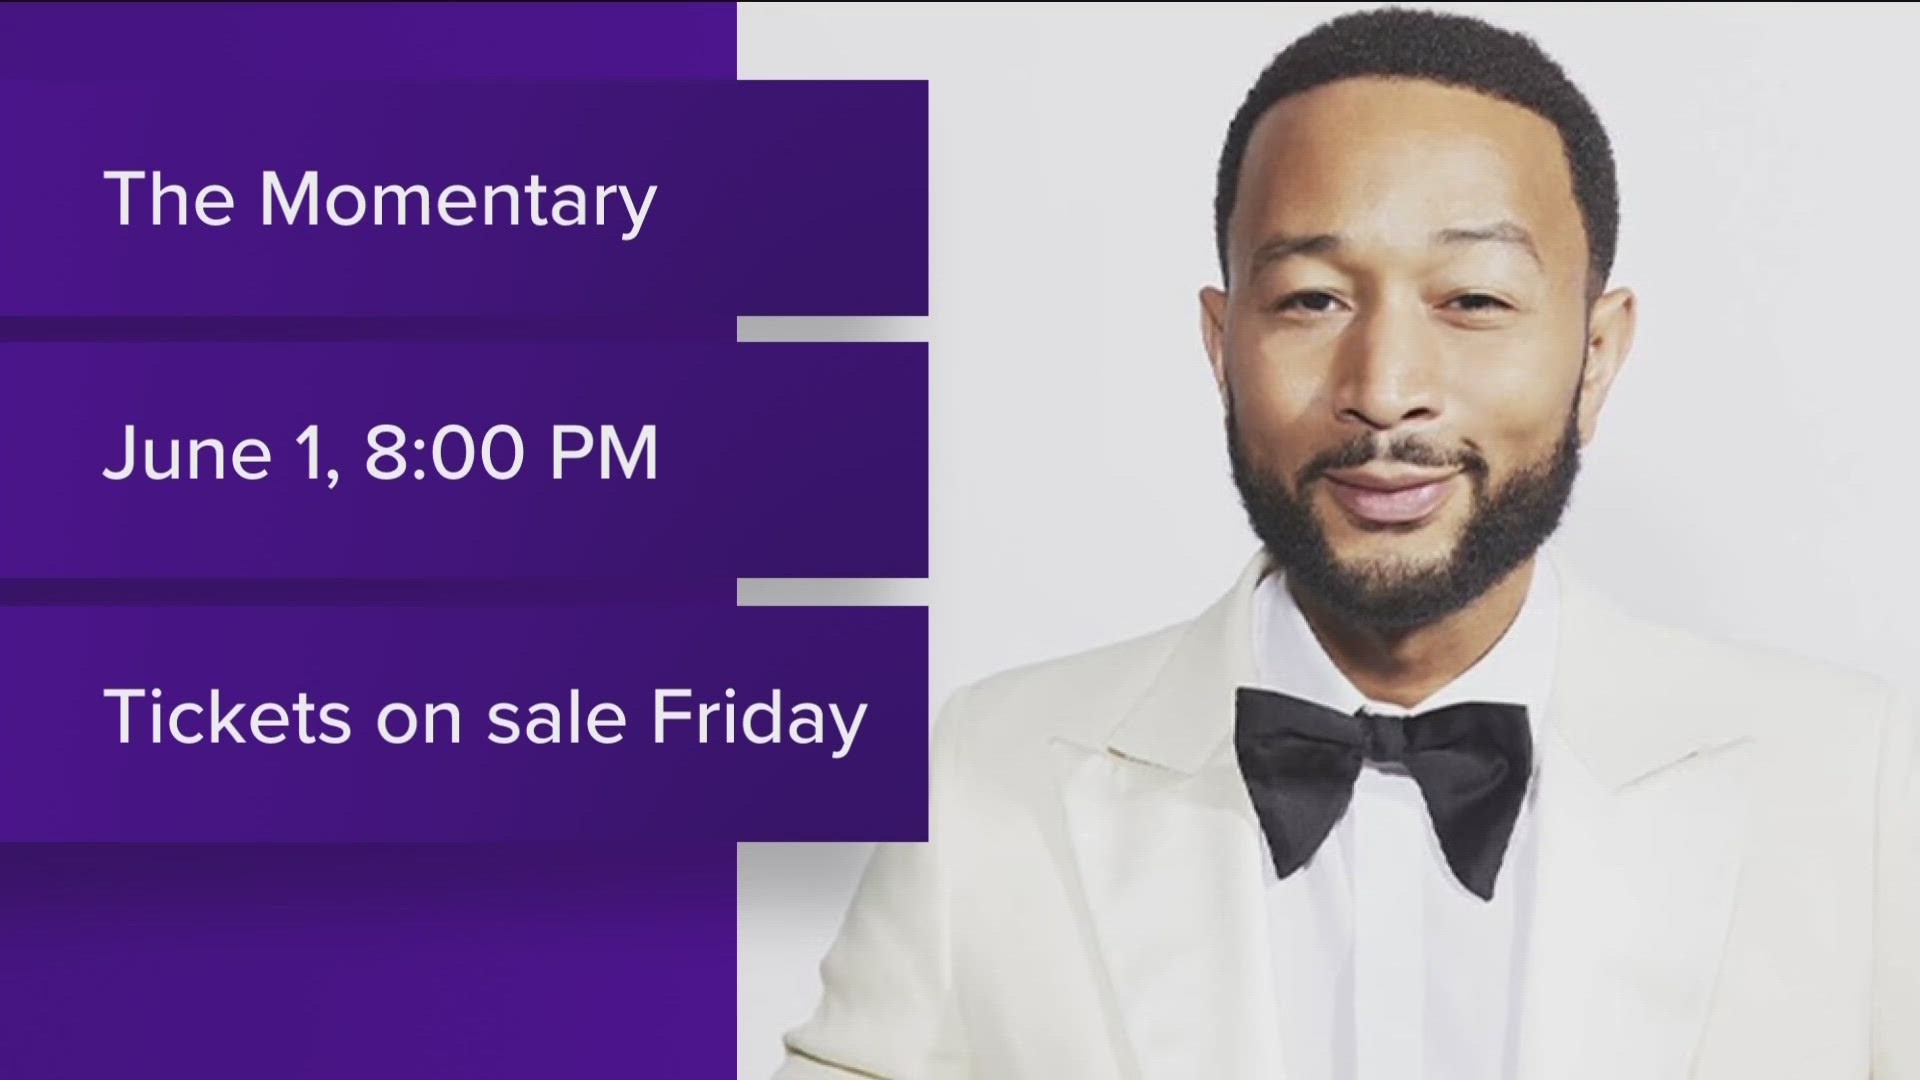 12 TIME GRAMMY WINNER JOHN LEGEND - TAKING THE STAGE THIS YEAR IN BENTONVILLE... THE MOMENTARY ANNOUNCED HE'LL PERFORM ON JUNE 1ST...